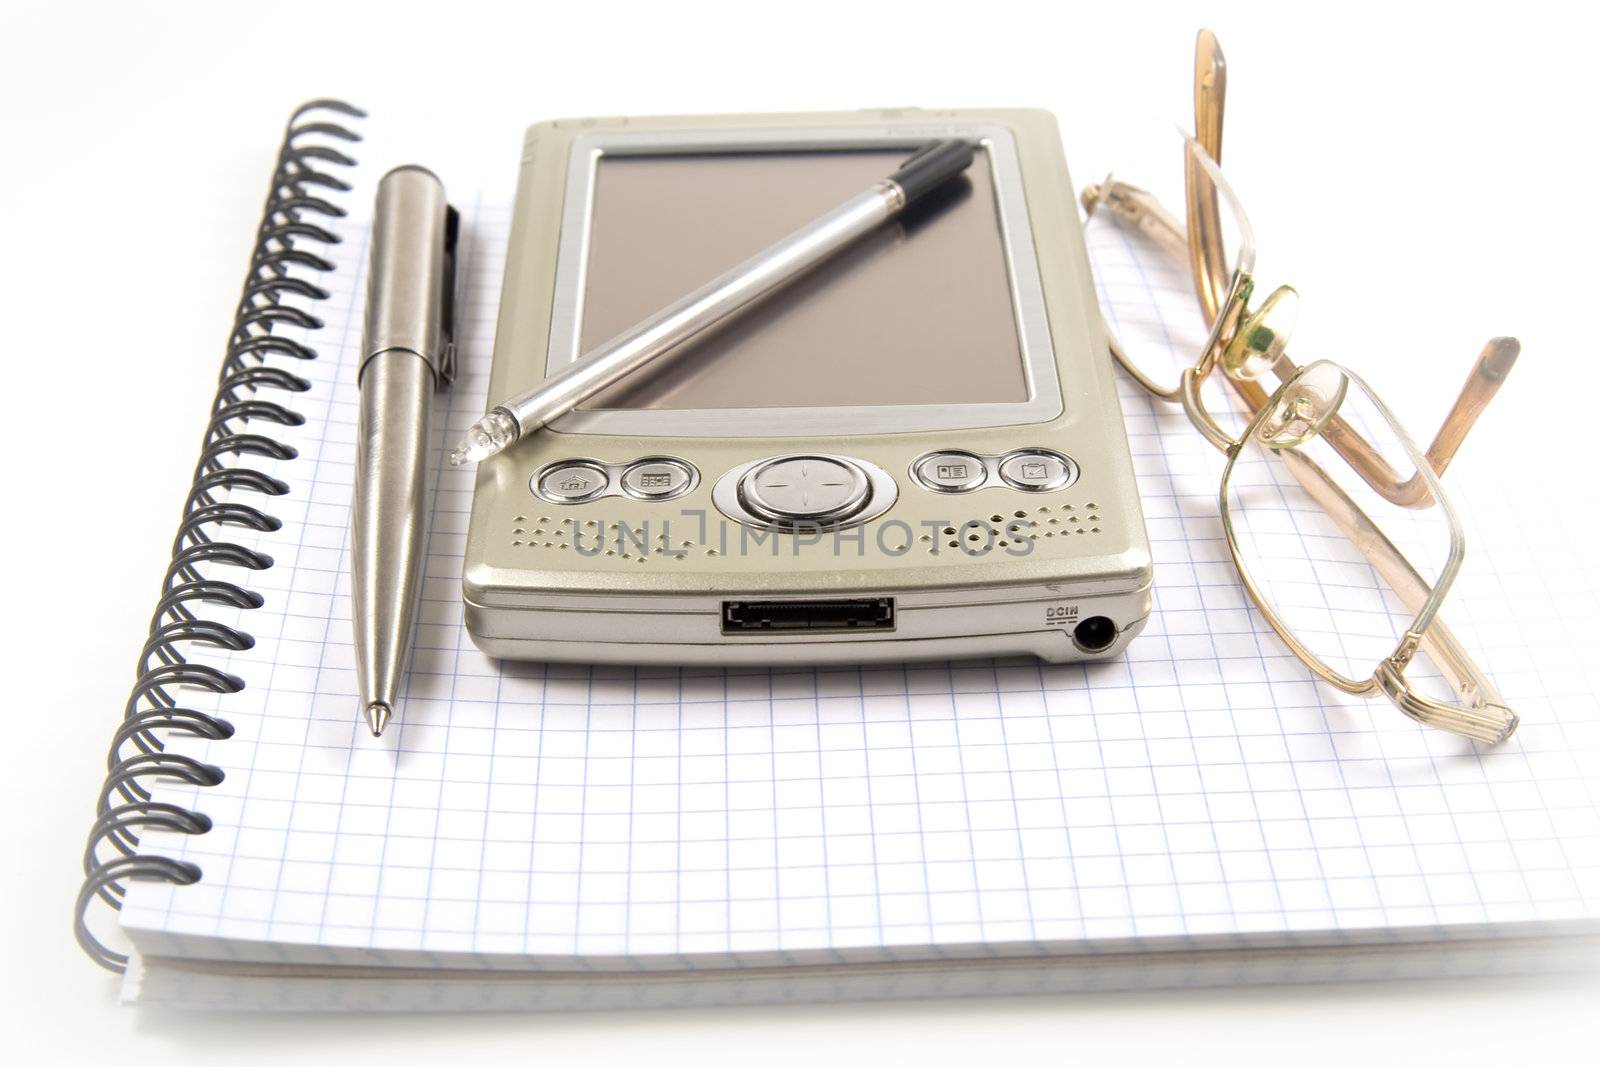 Vignetting image of pen, PDA  and eyeglasses on spiral notebook